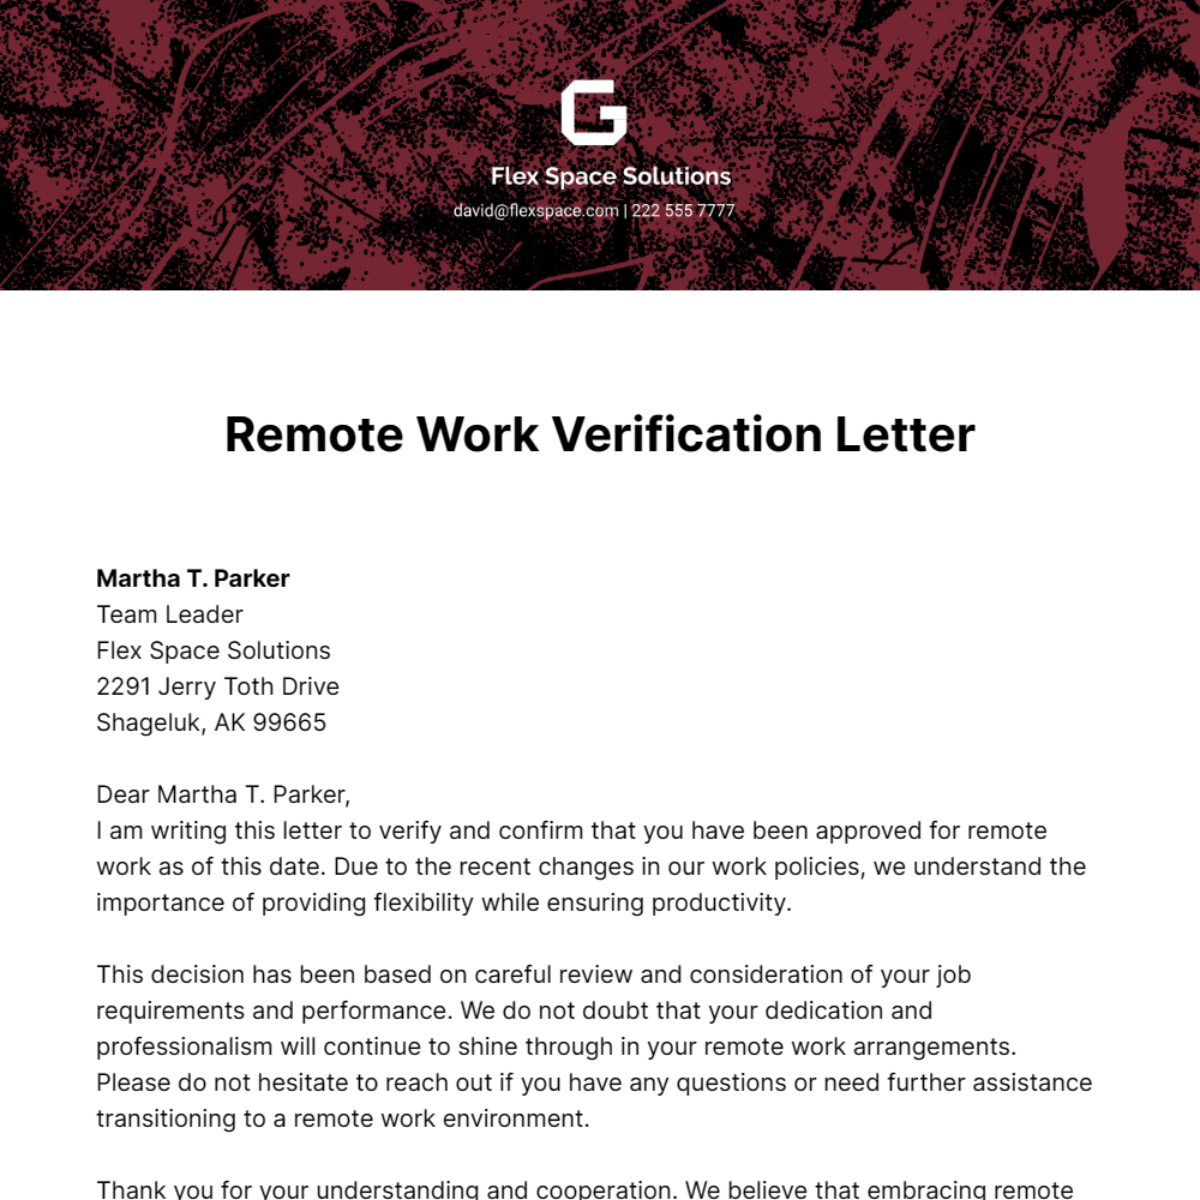 Remote Work Verification Letter Template